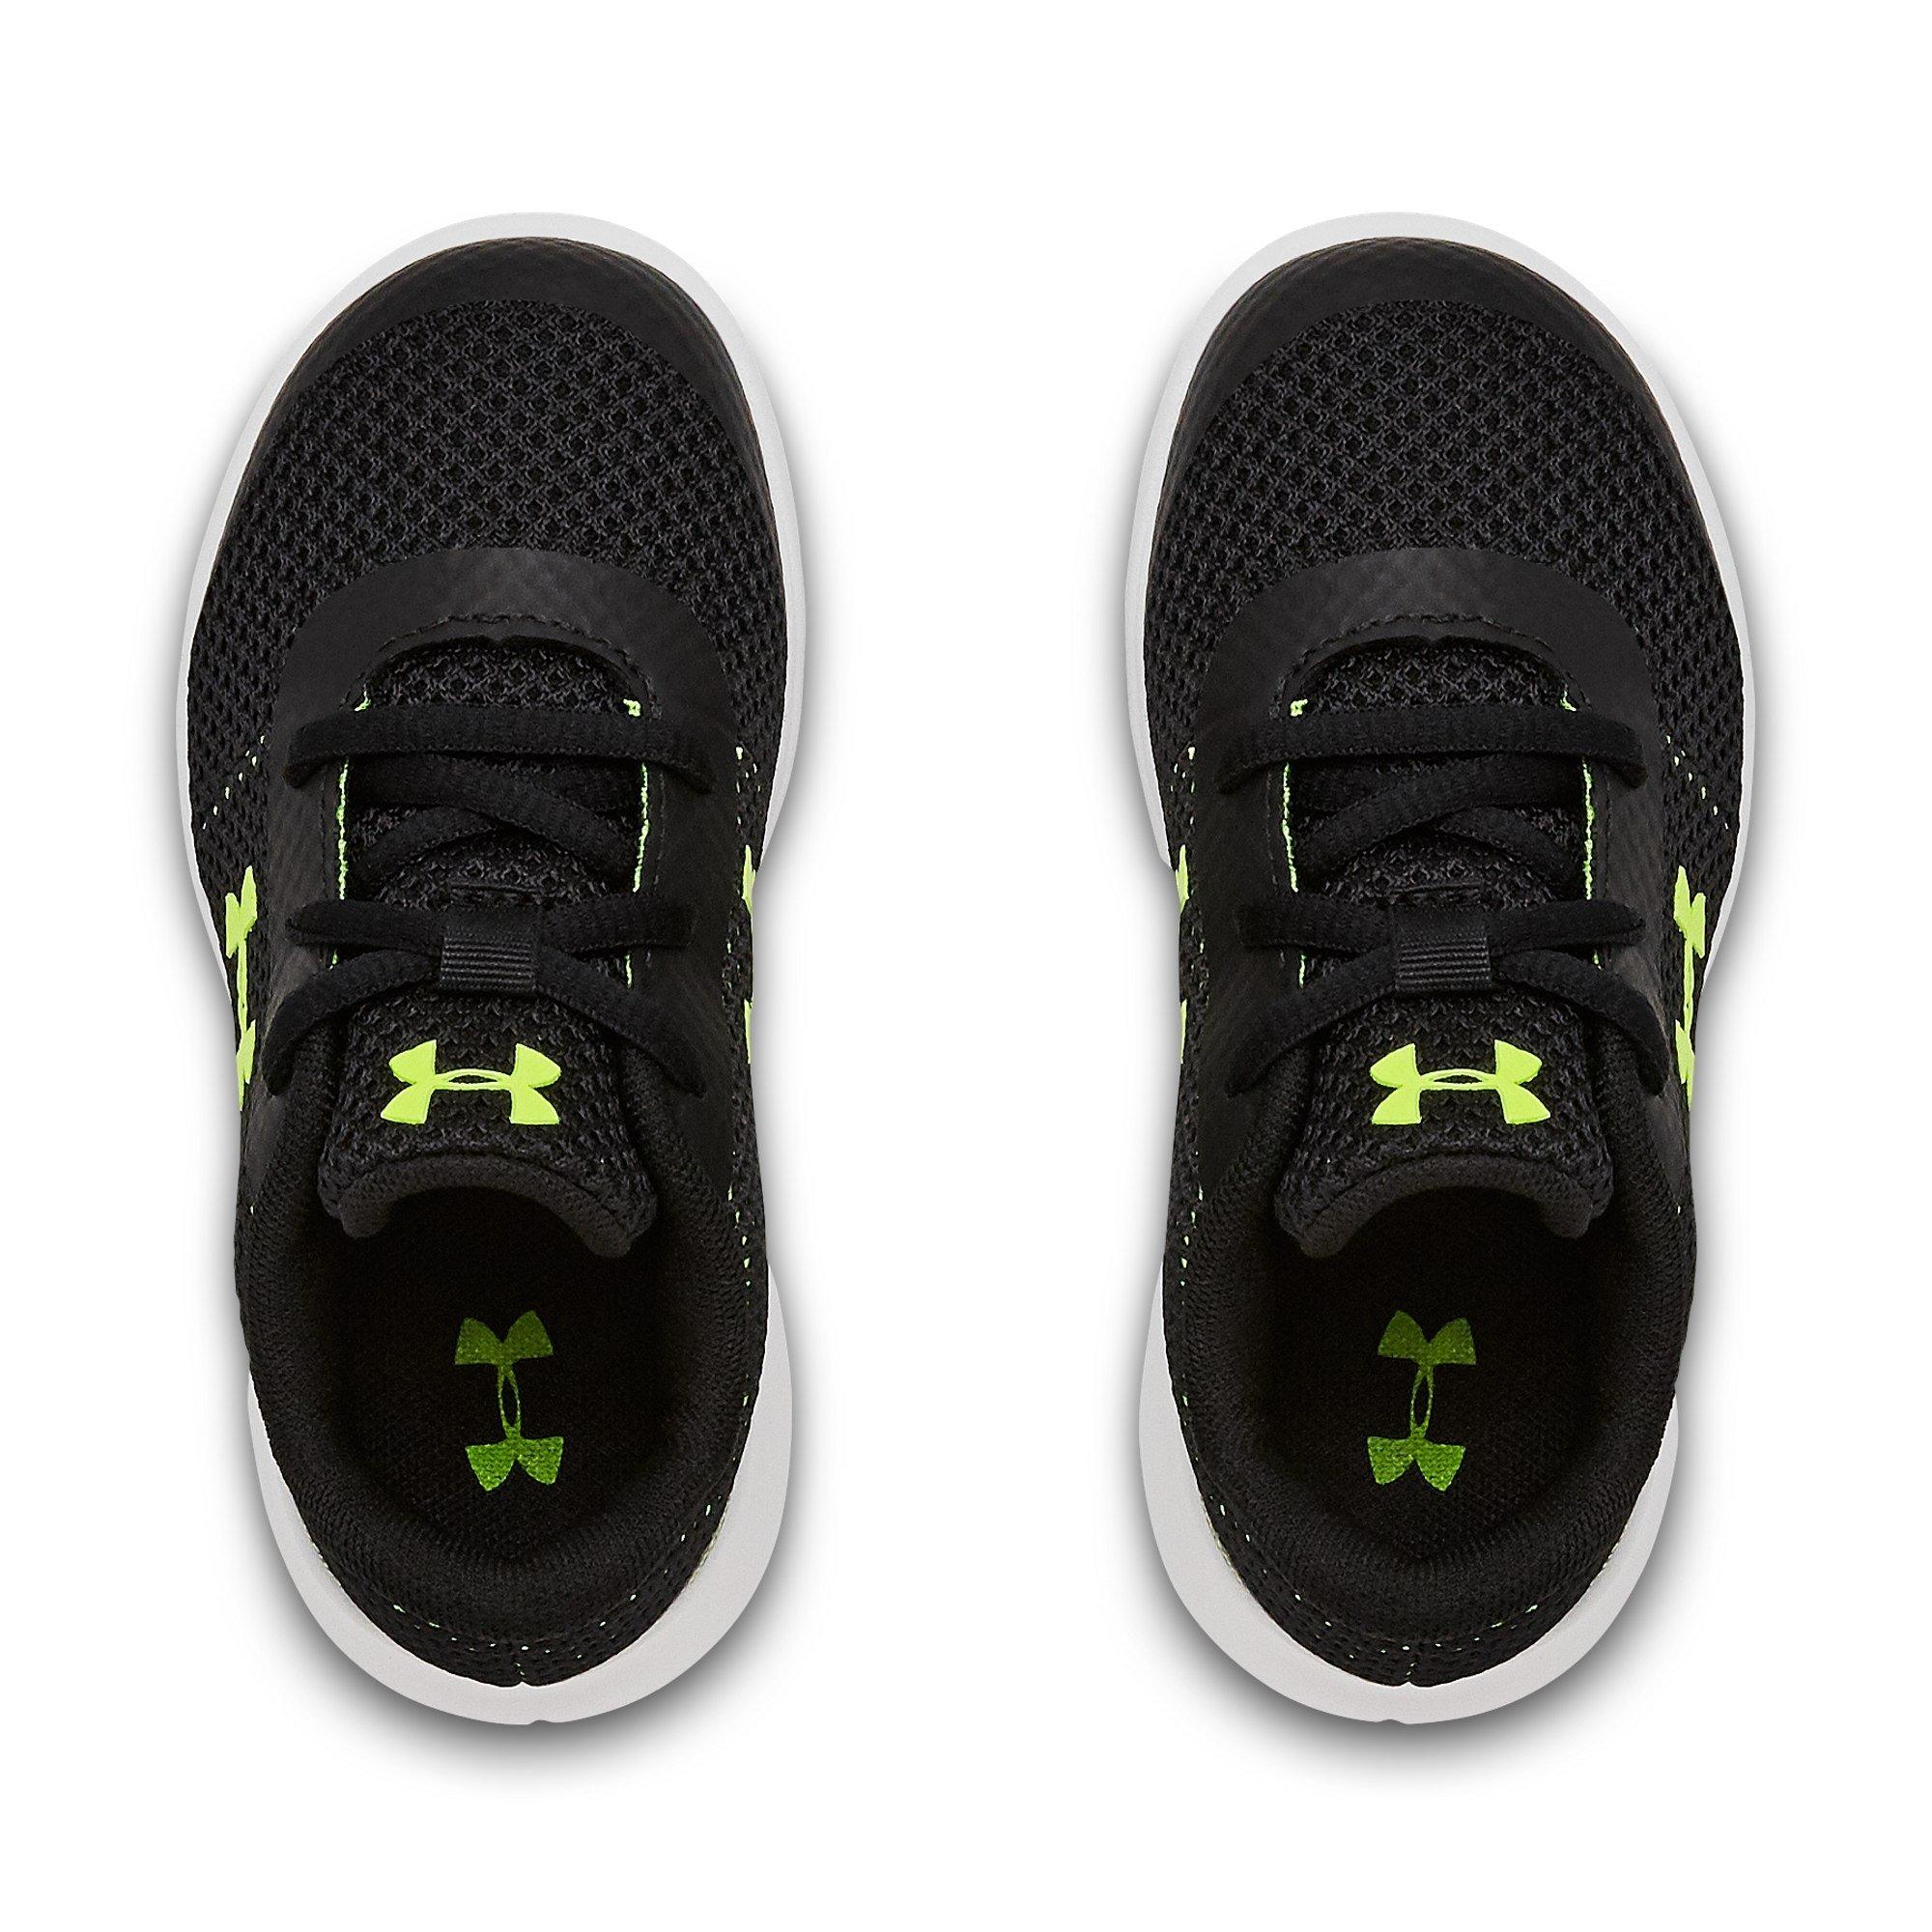 toddler size 10 under armour shoes